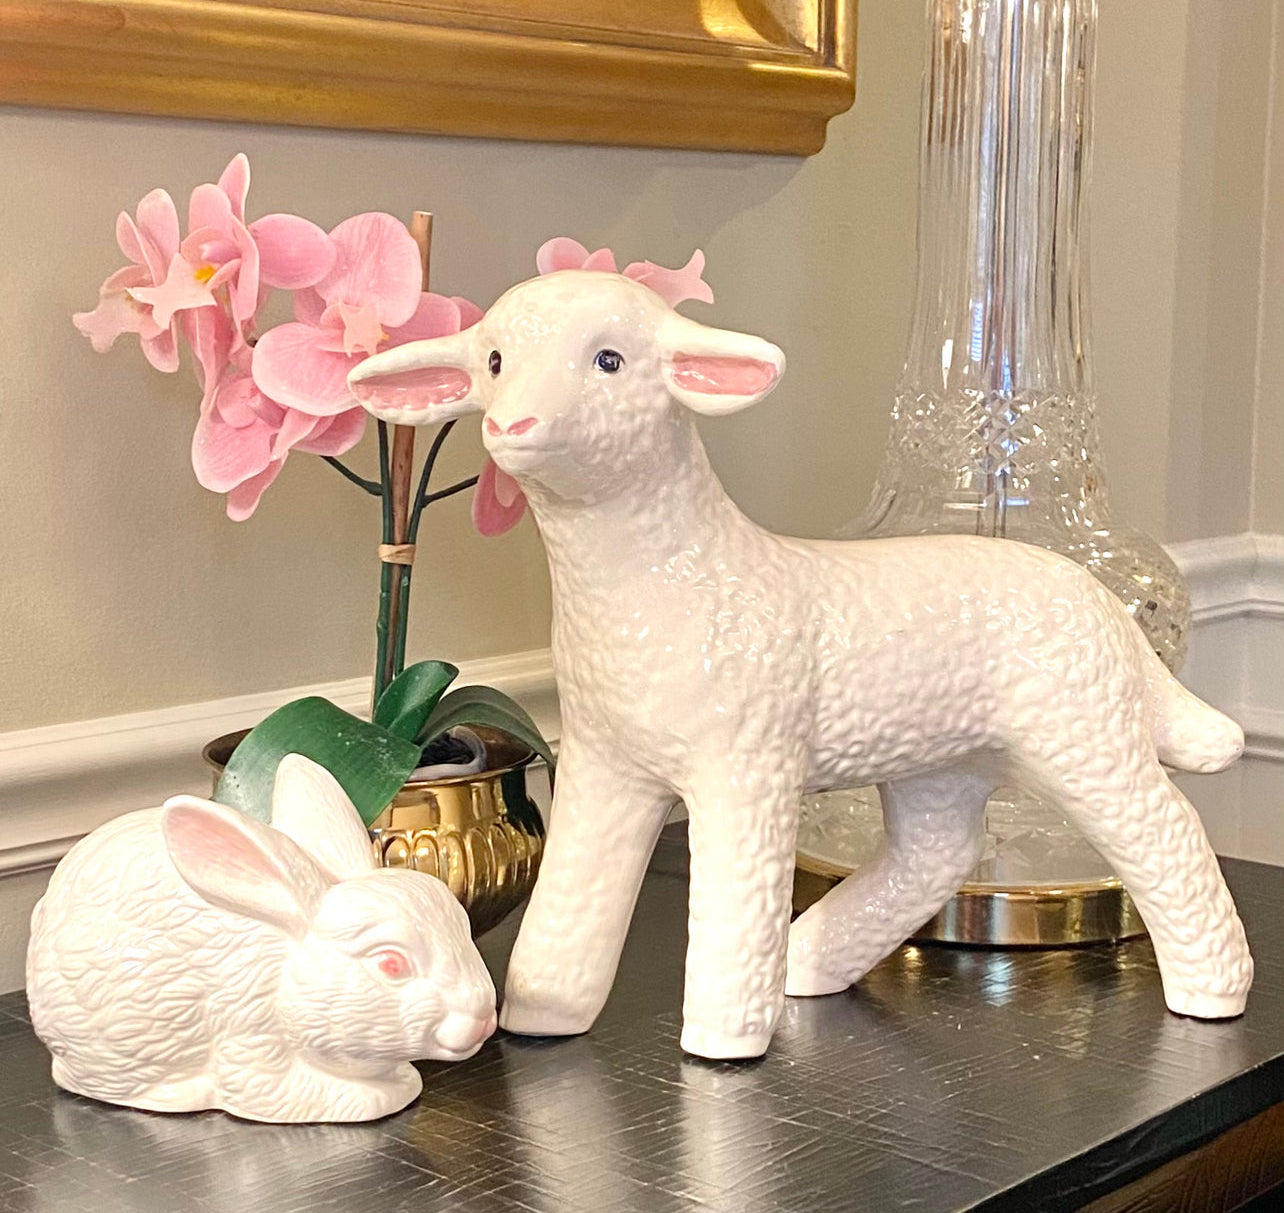 Vintage sweet & statuesque lamb centerpiece for your springtime holiday table scape.